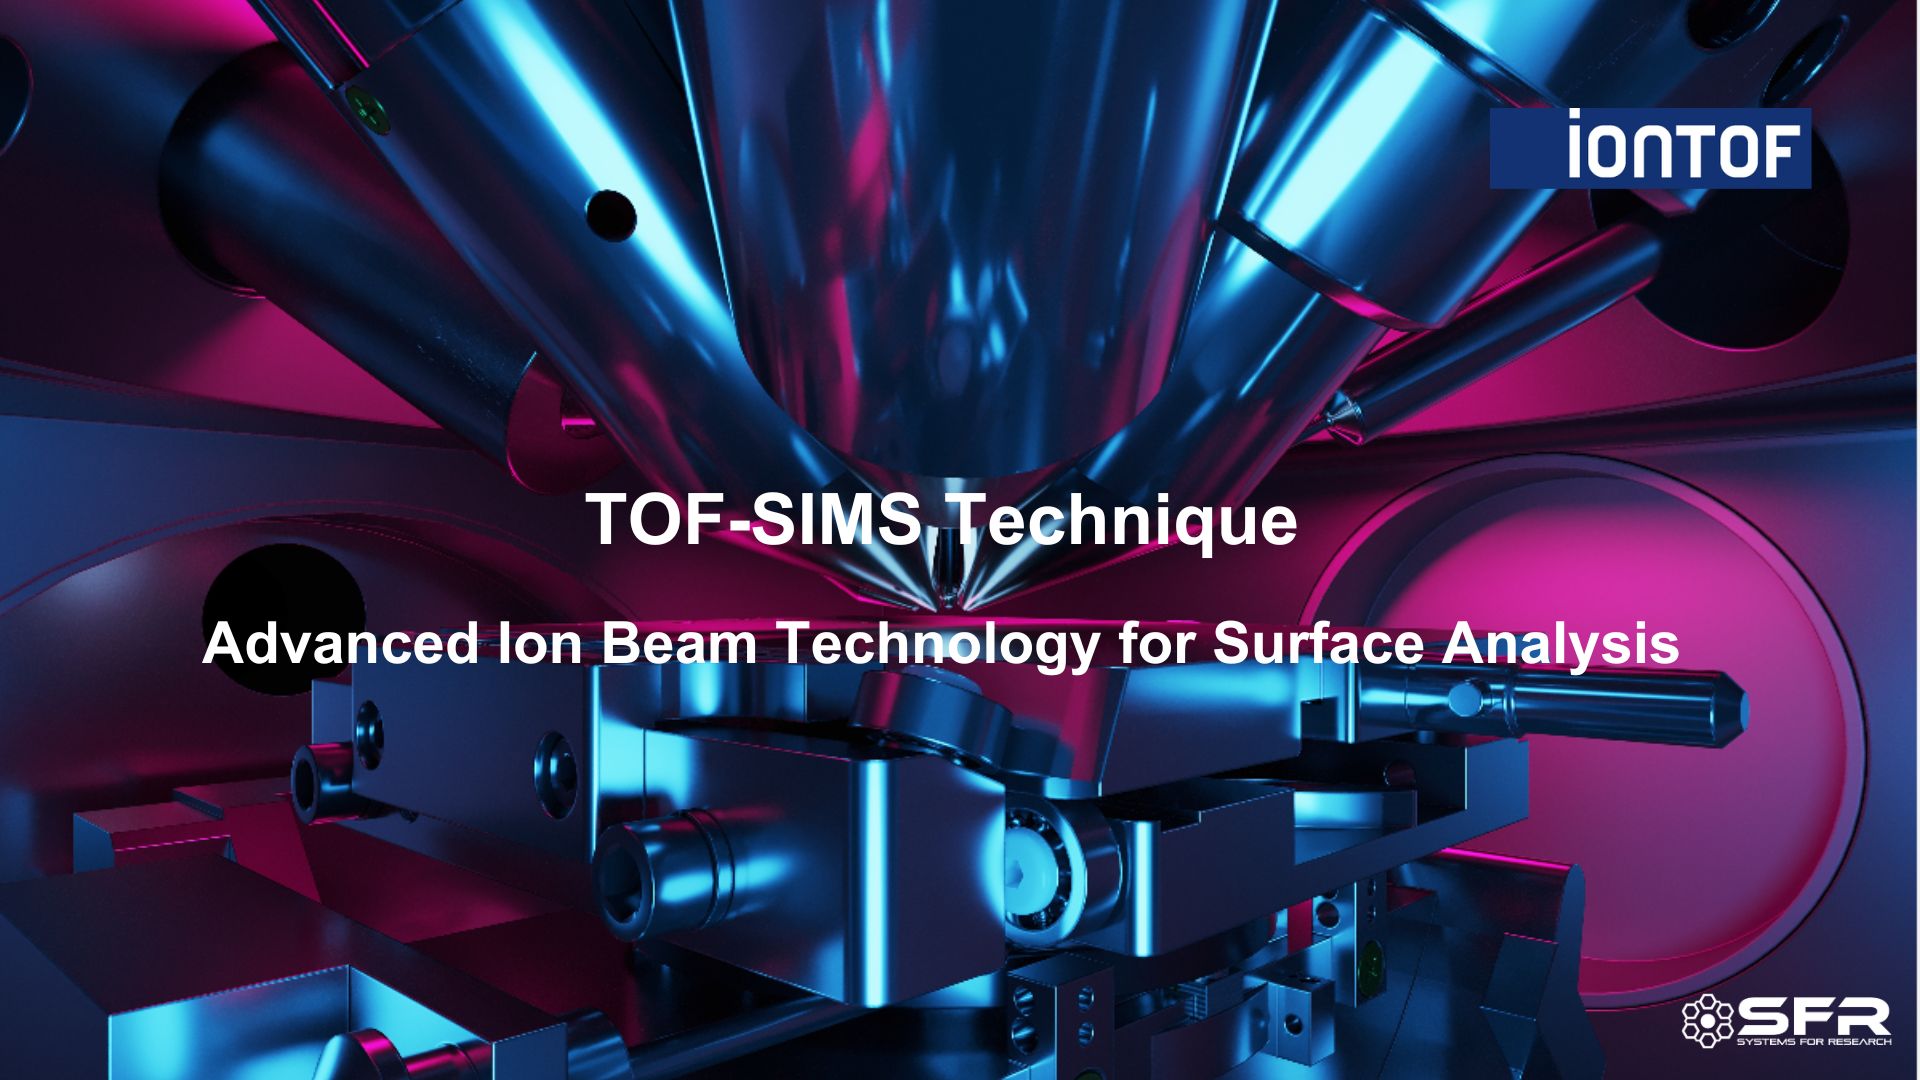 TOF-SIMS Technique: Advanced Ion Beam Technology for Surface Analysis